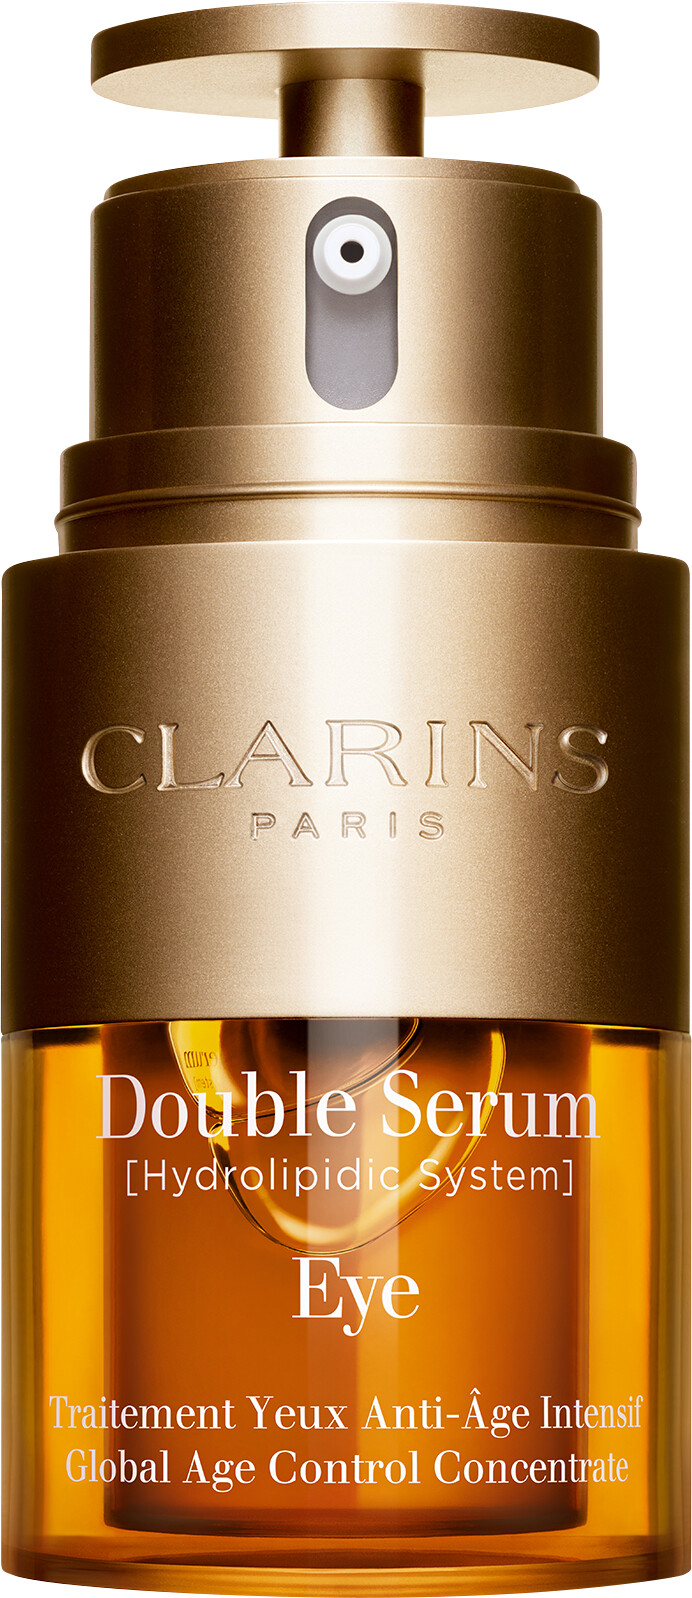 Clarins double serum eye global age control concentrate weapons of tmnt